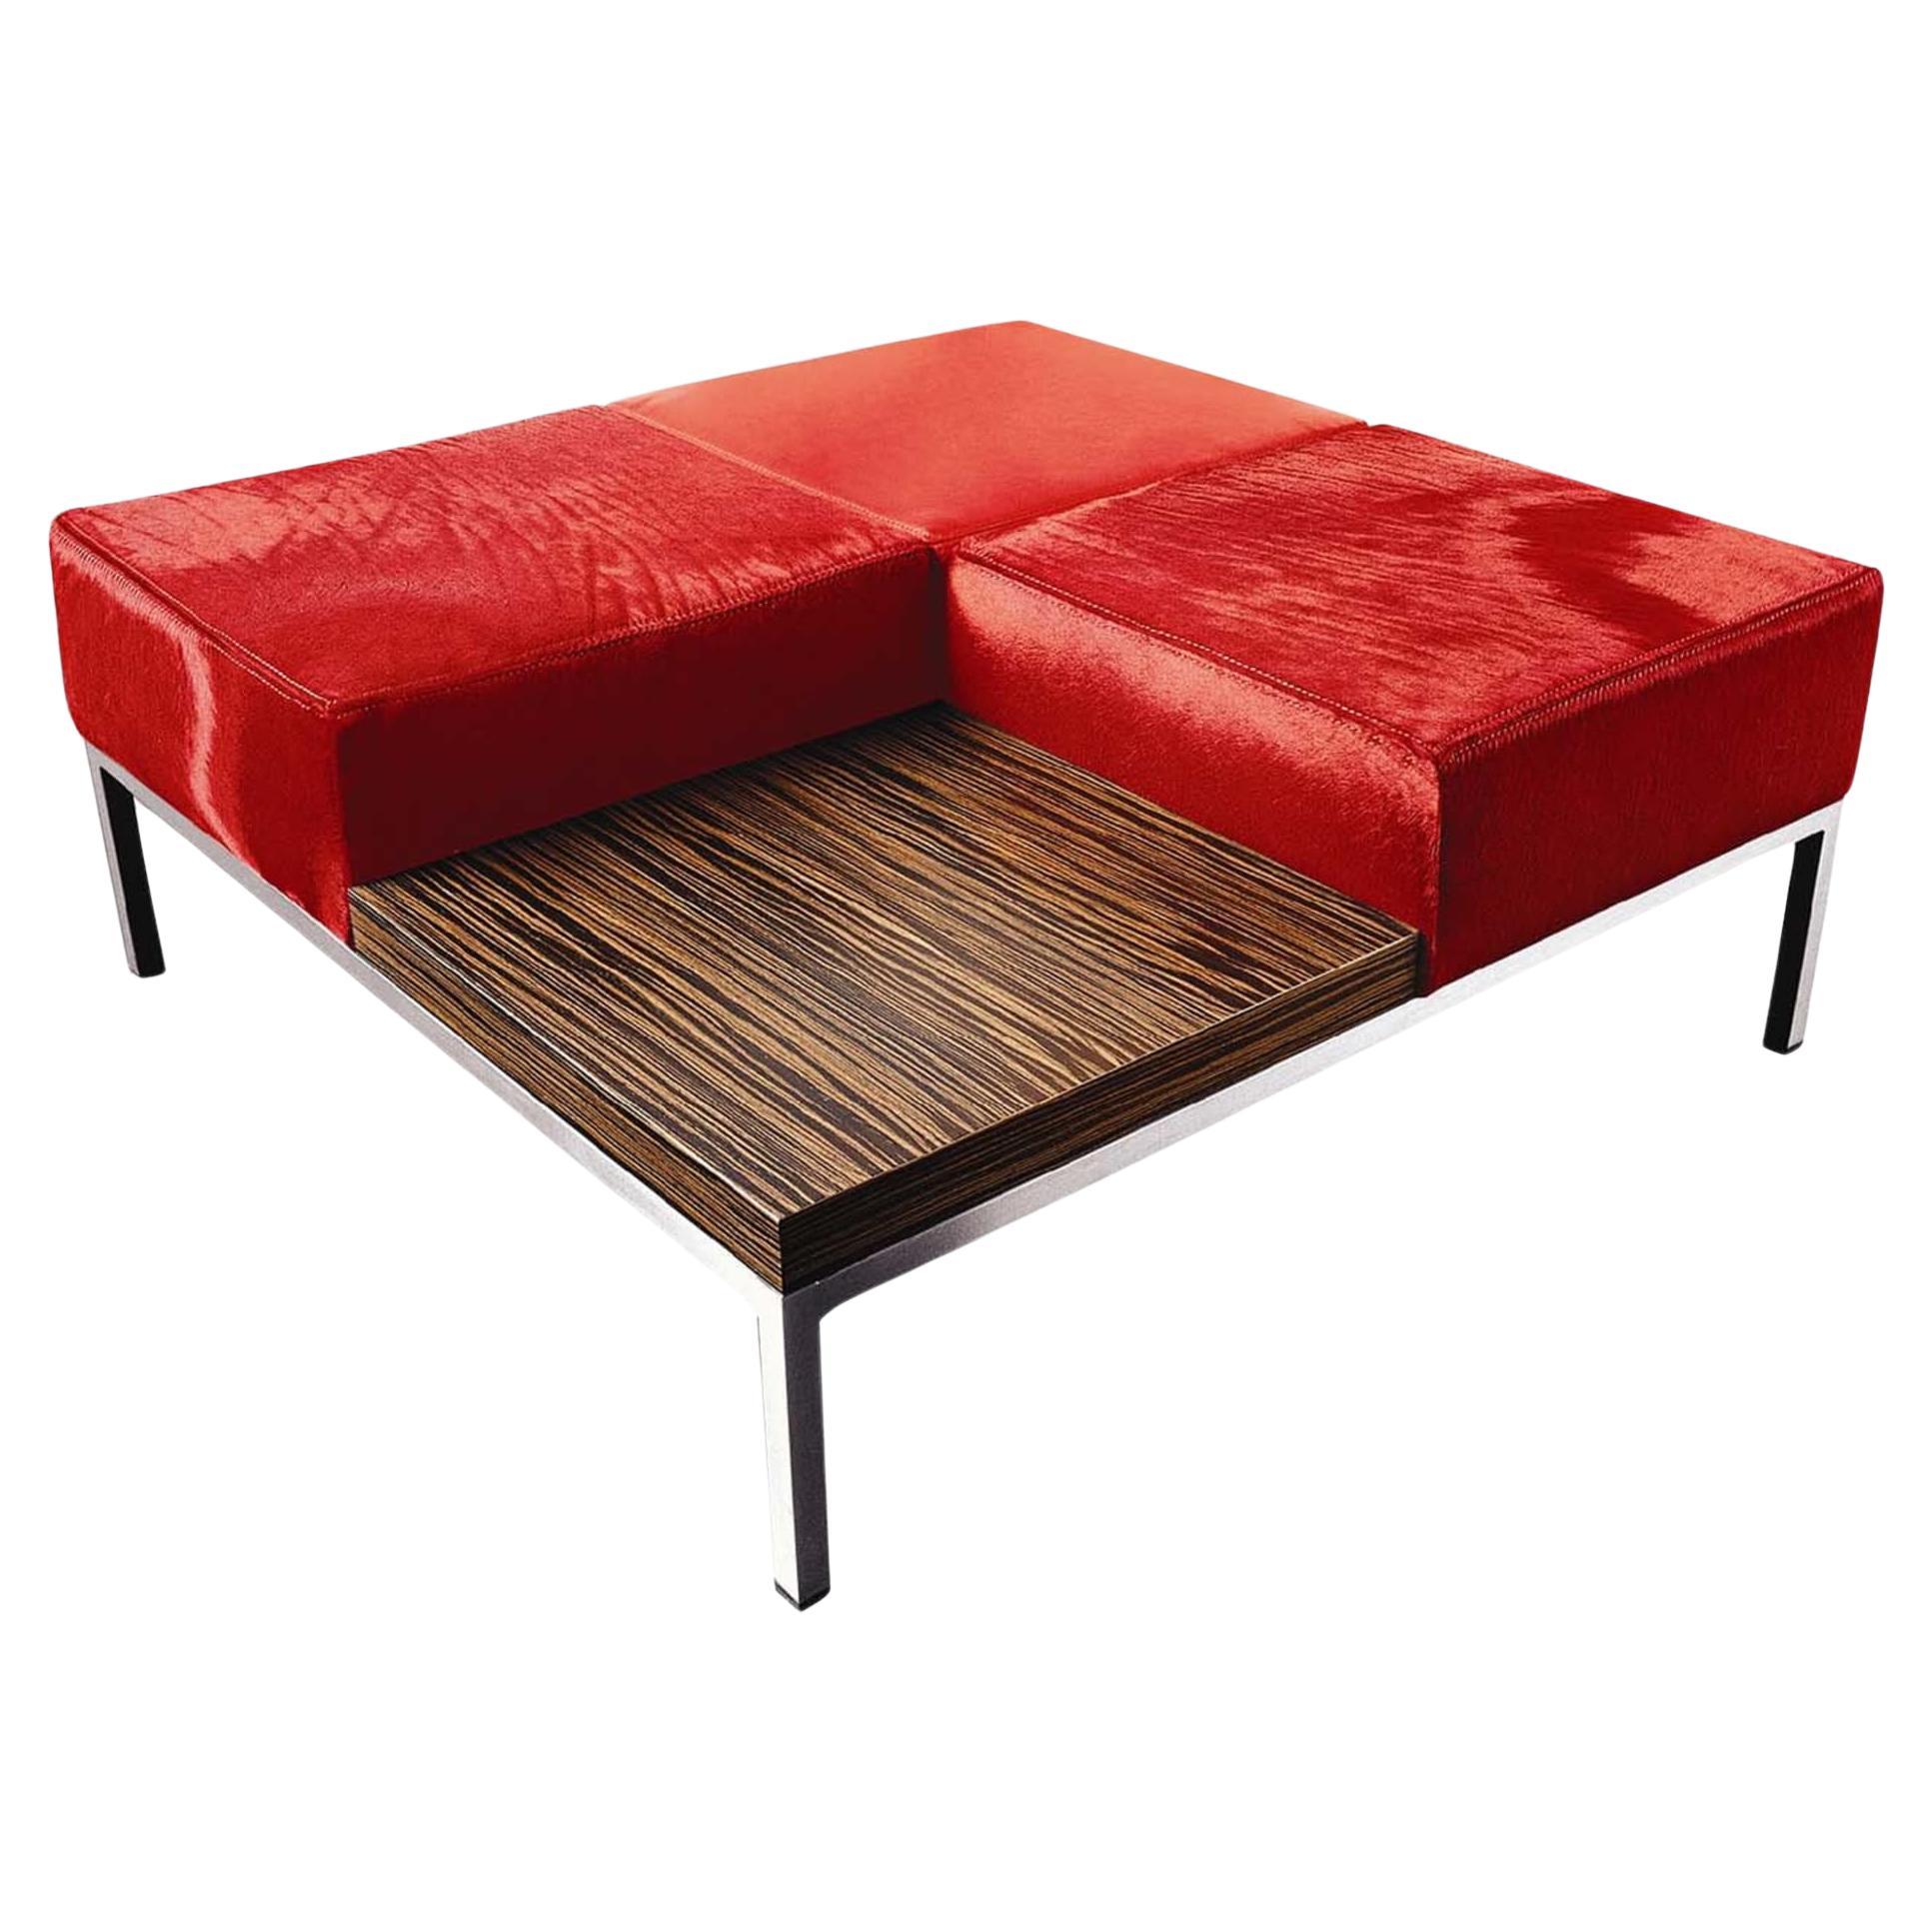 Every 3-Seater Pouf with Side Table For Sale